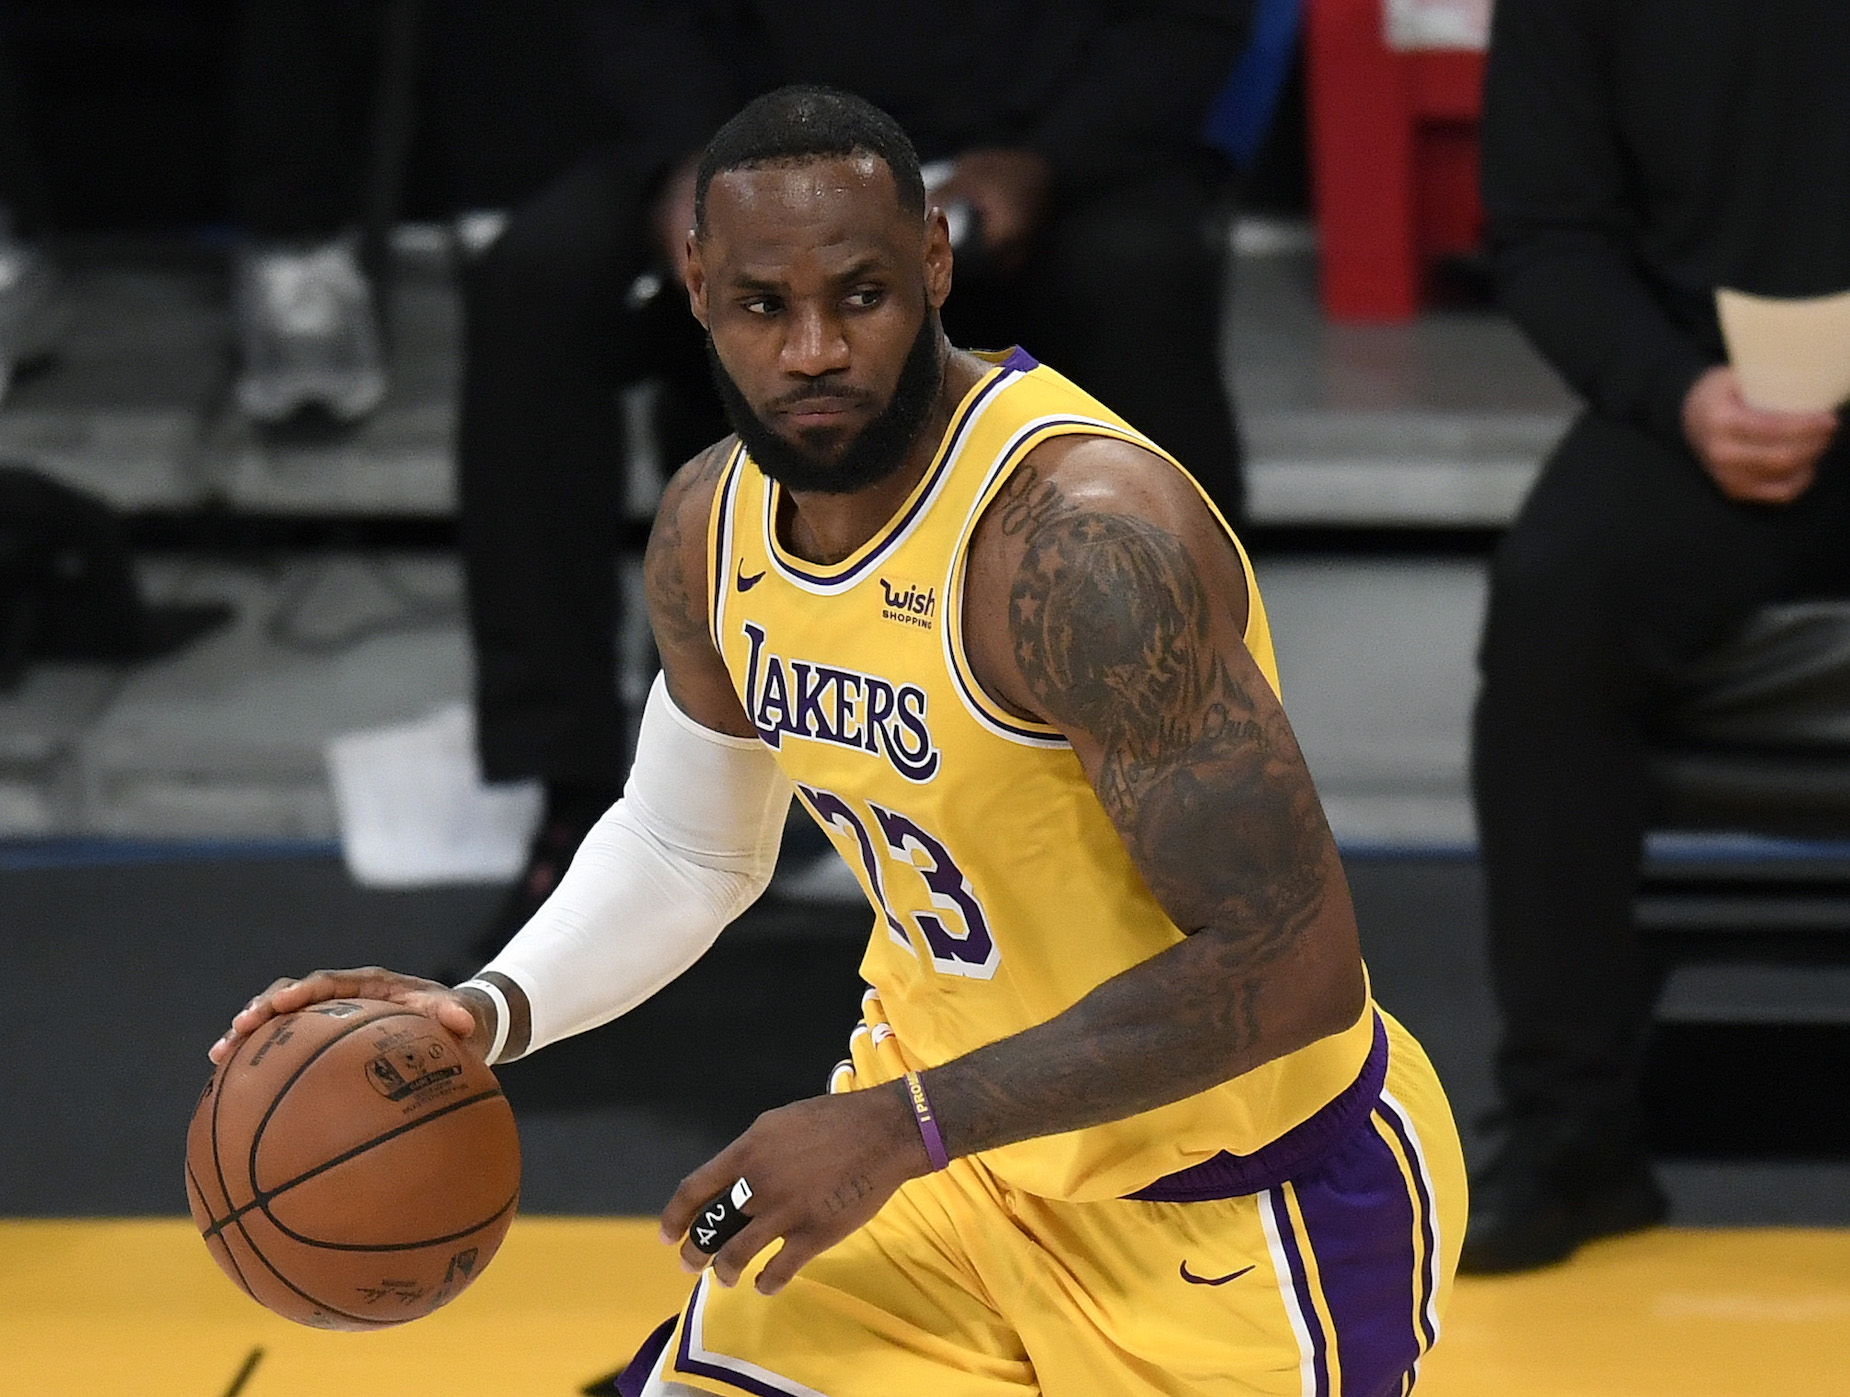 How old is LeBron James and how long has he been playing in the NBA?